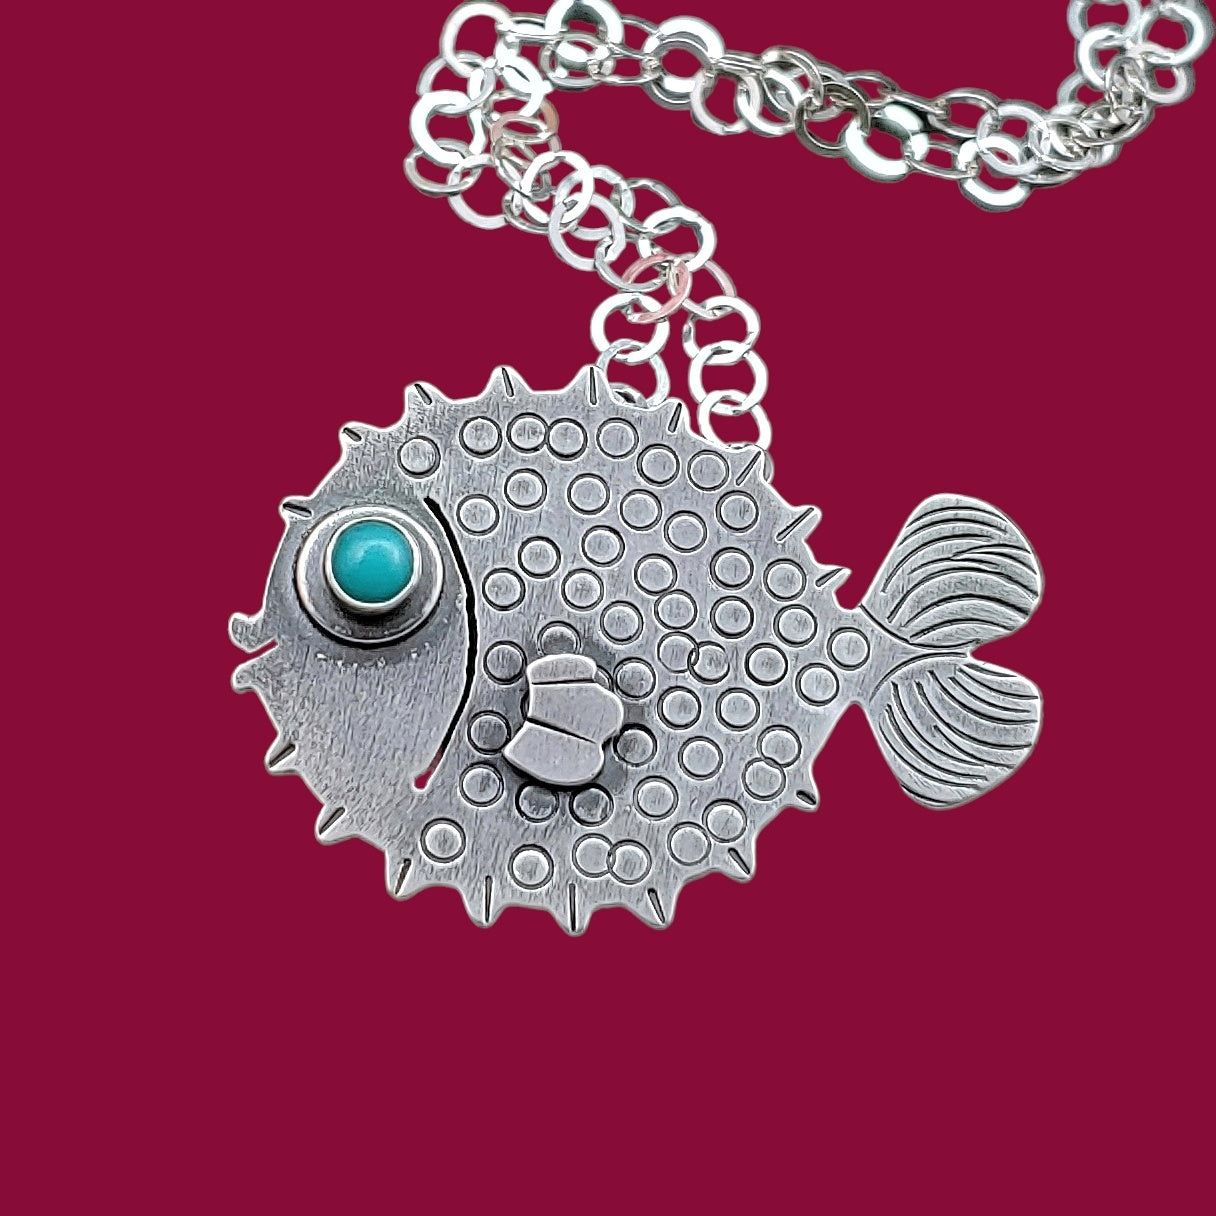 Blowfish necklace in sterling silver